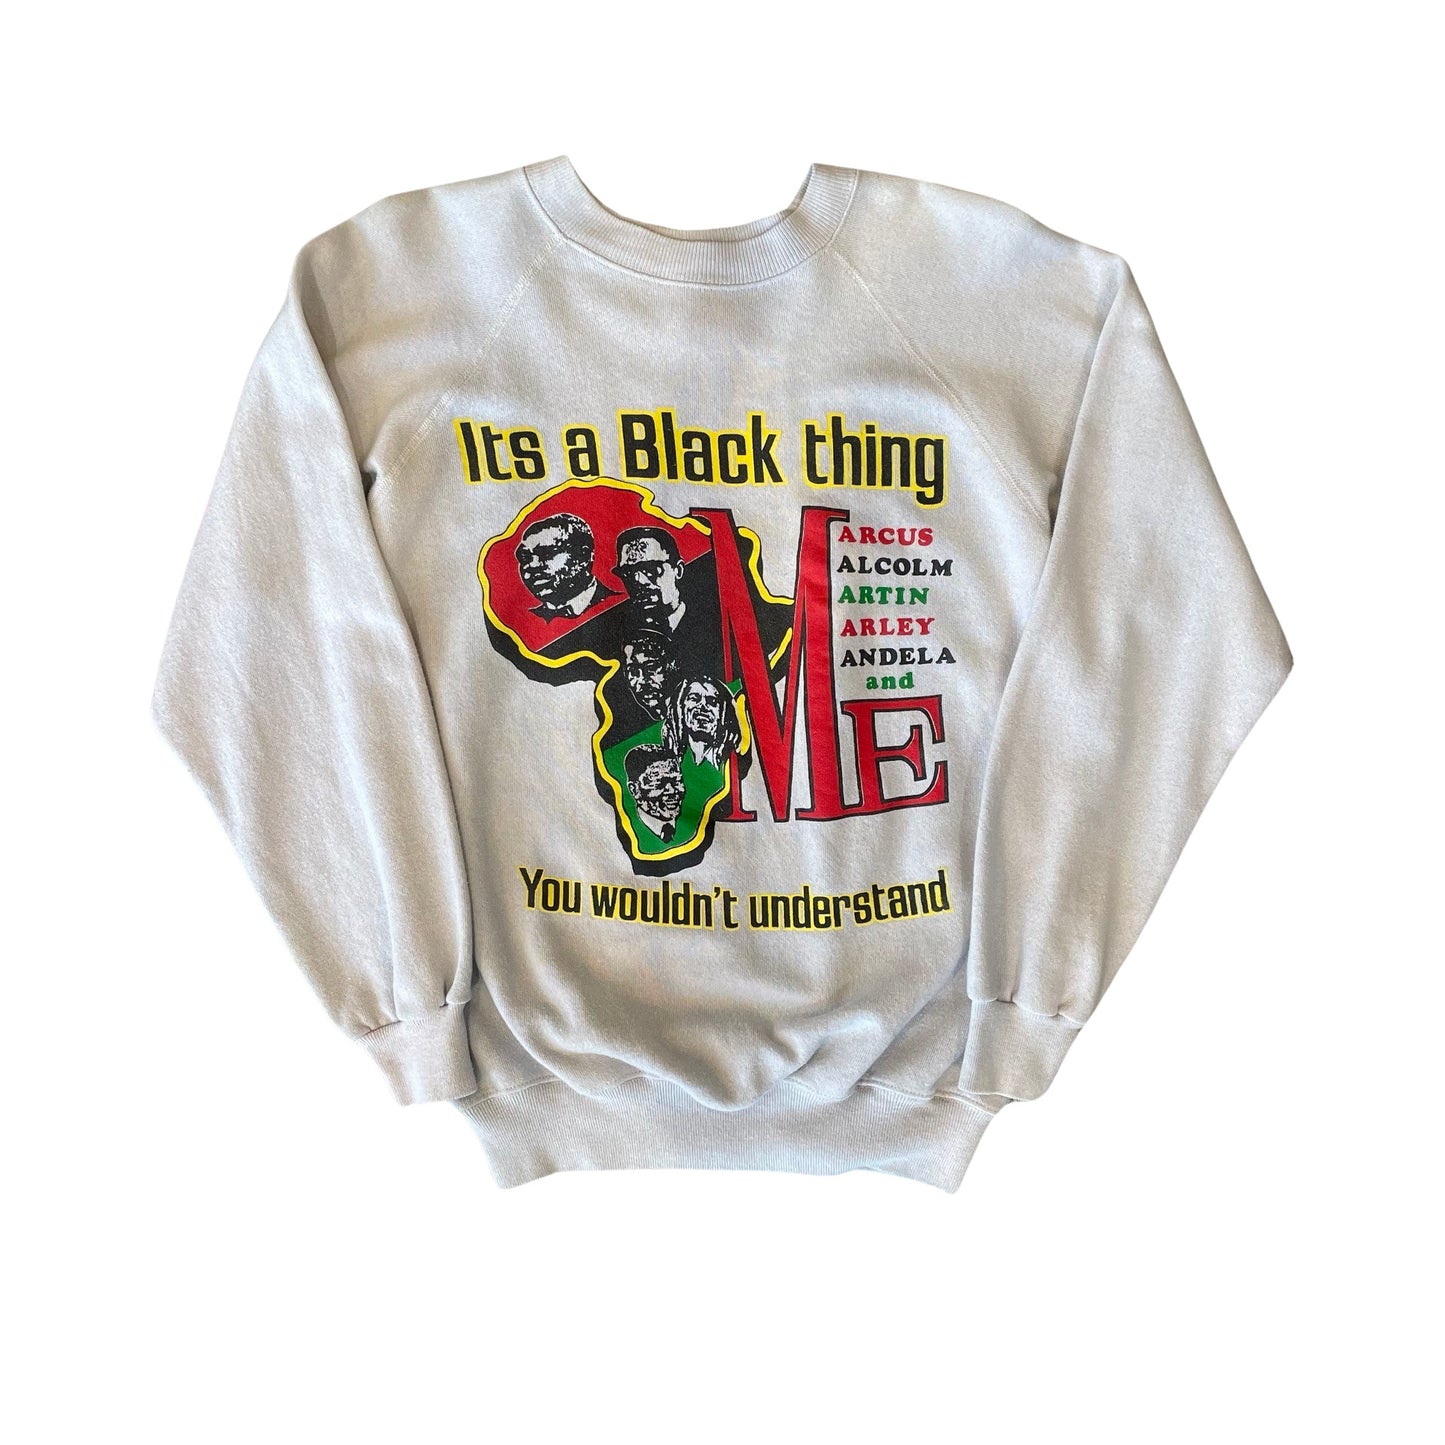 Vintage 'It's a Black Thing' Crew